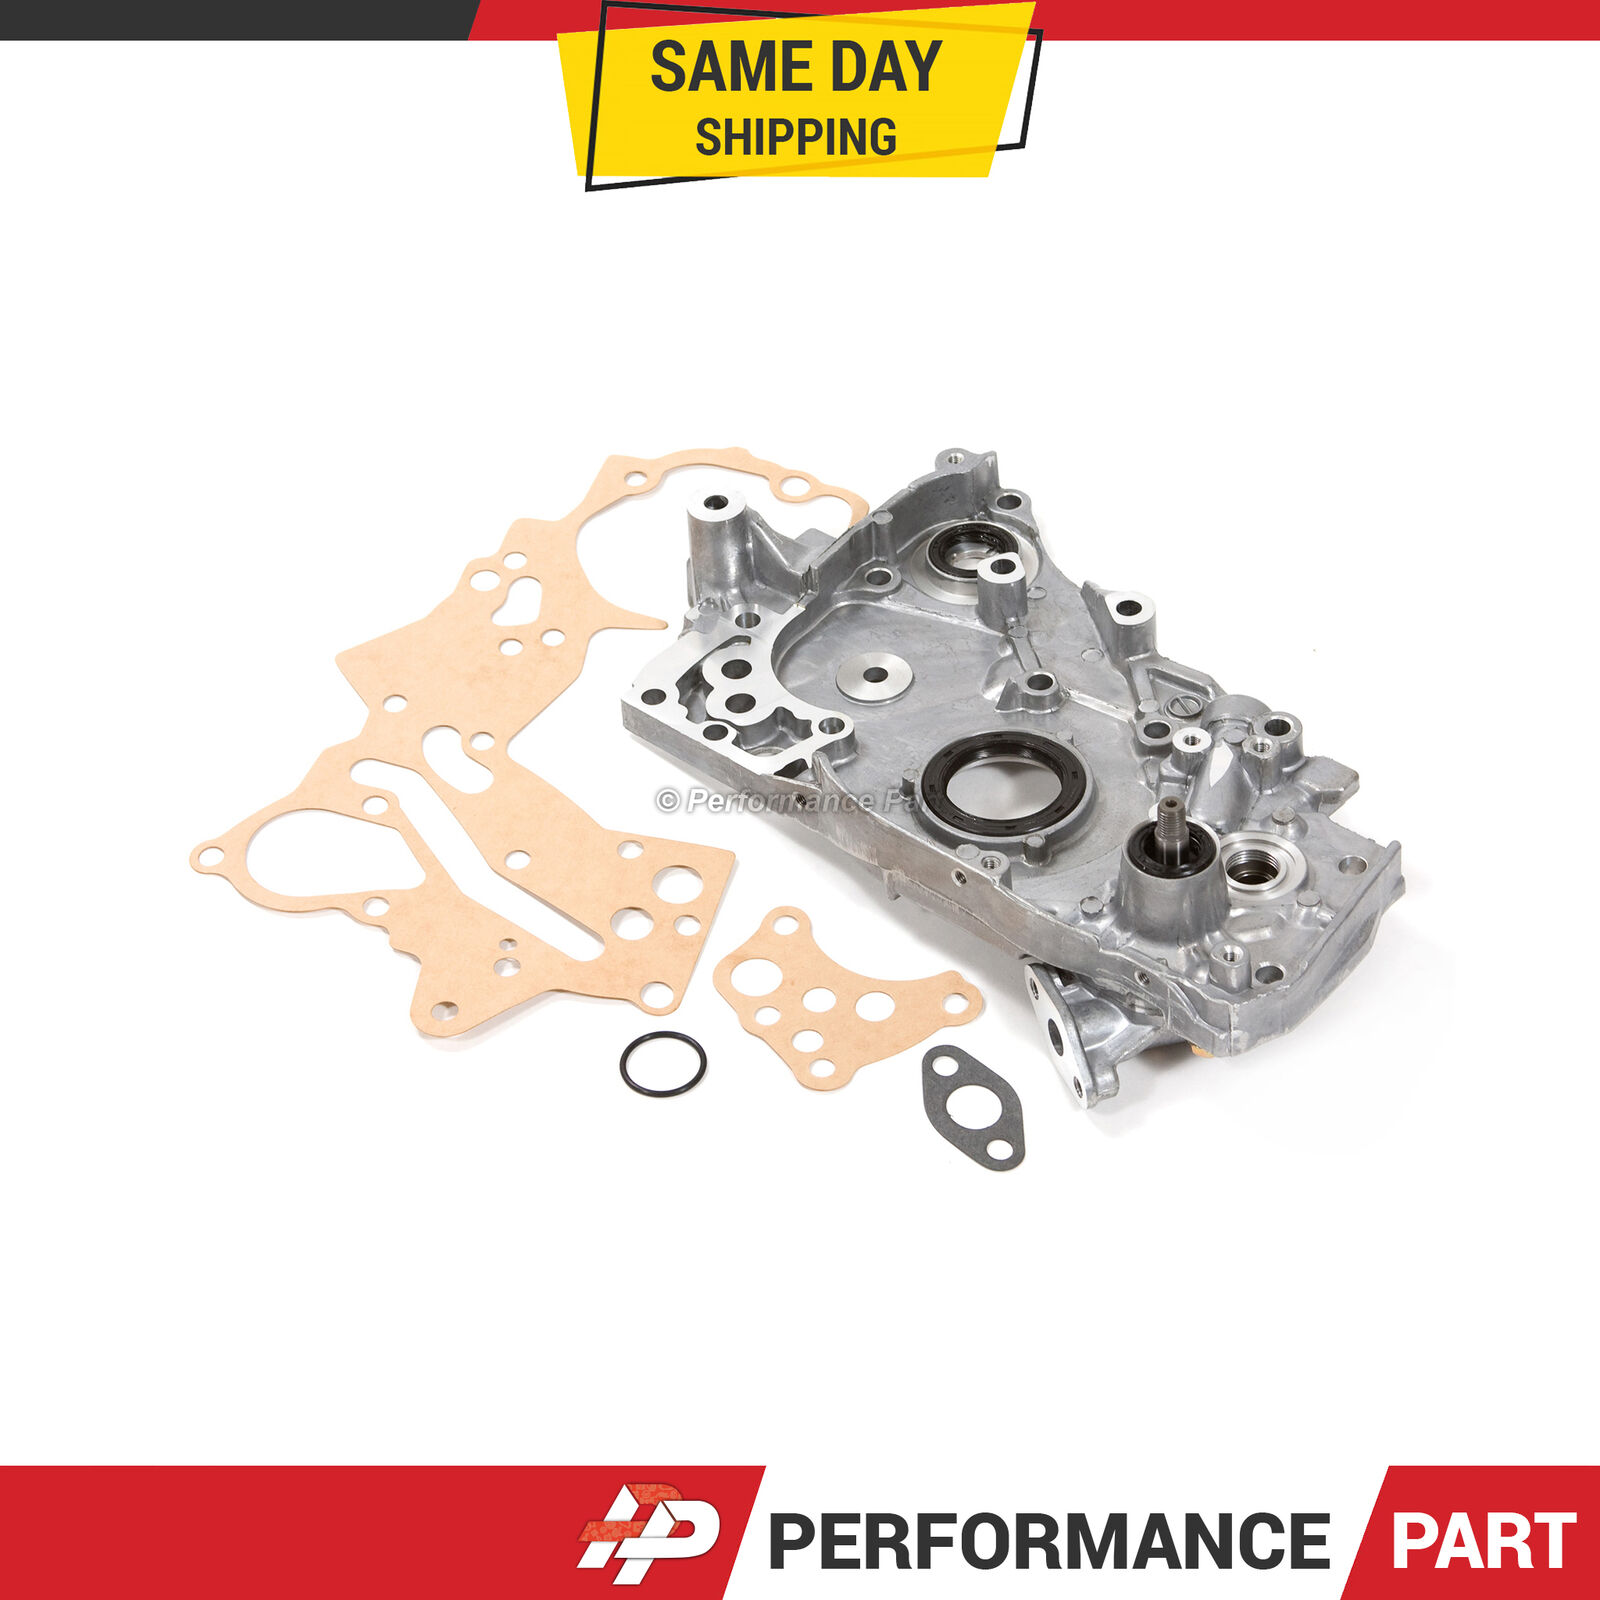 Oil Pump for Fit 93-99 Mitsubishi Eclipse & Turbo 2.0L 2nd Generation 4G63